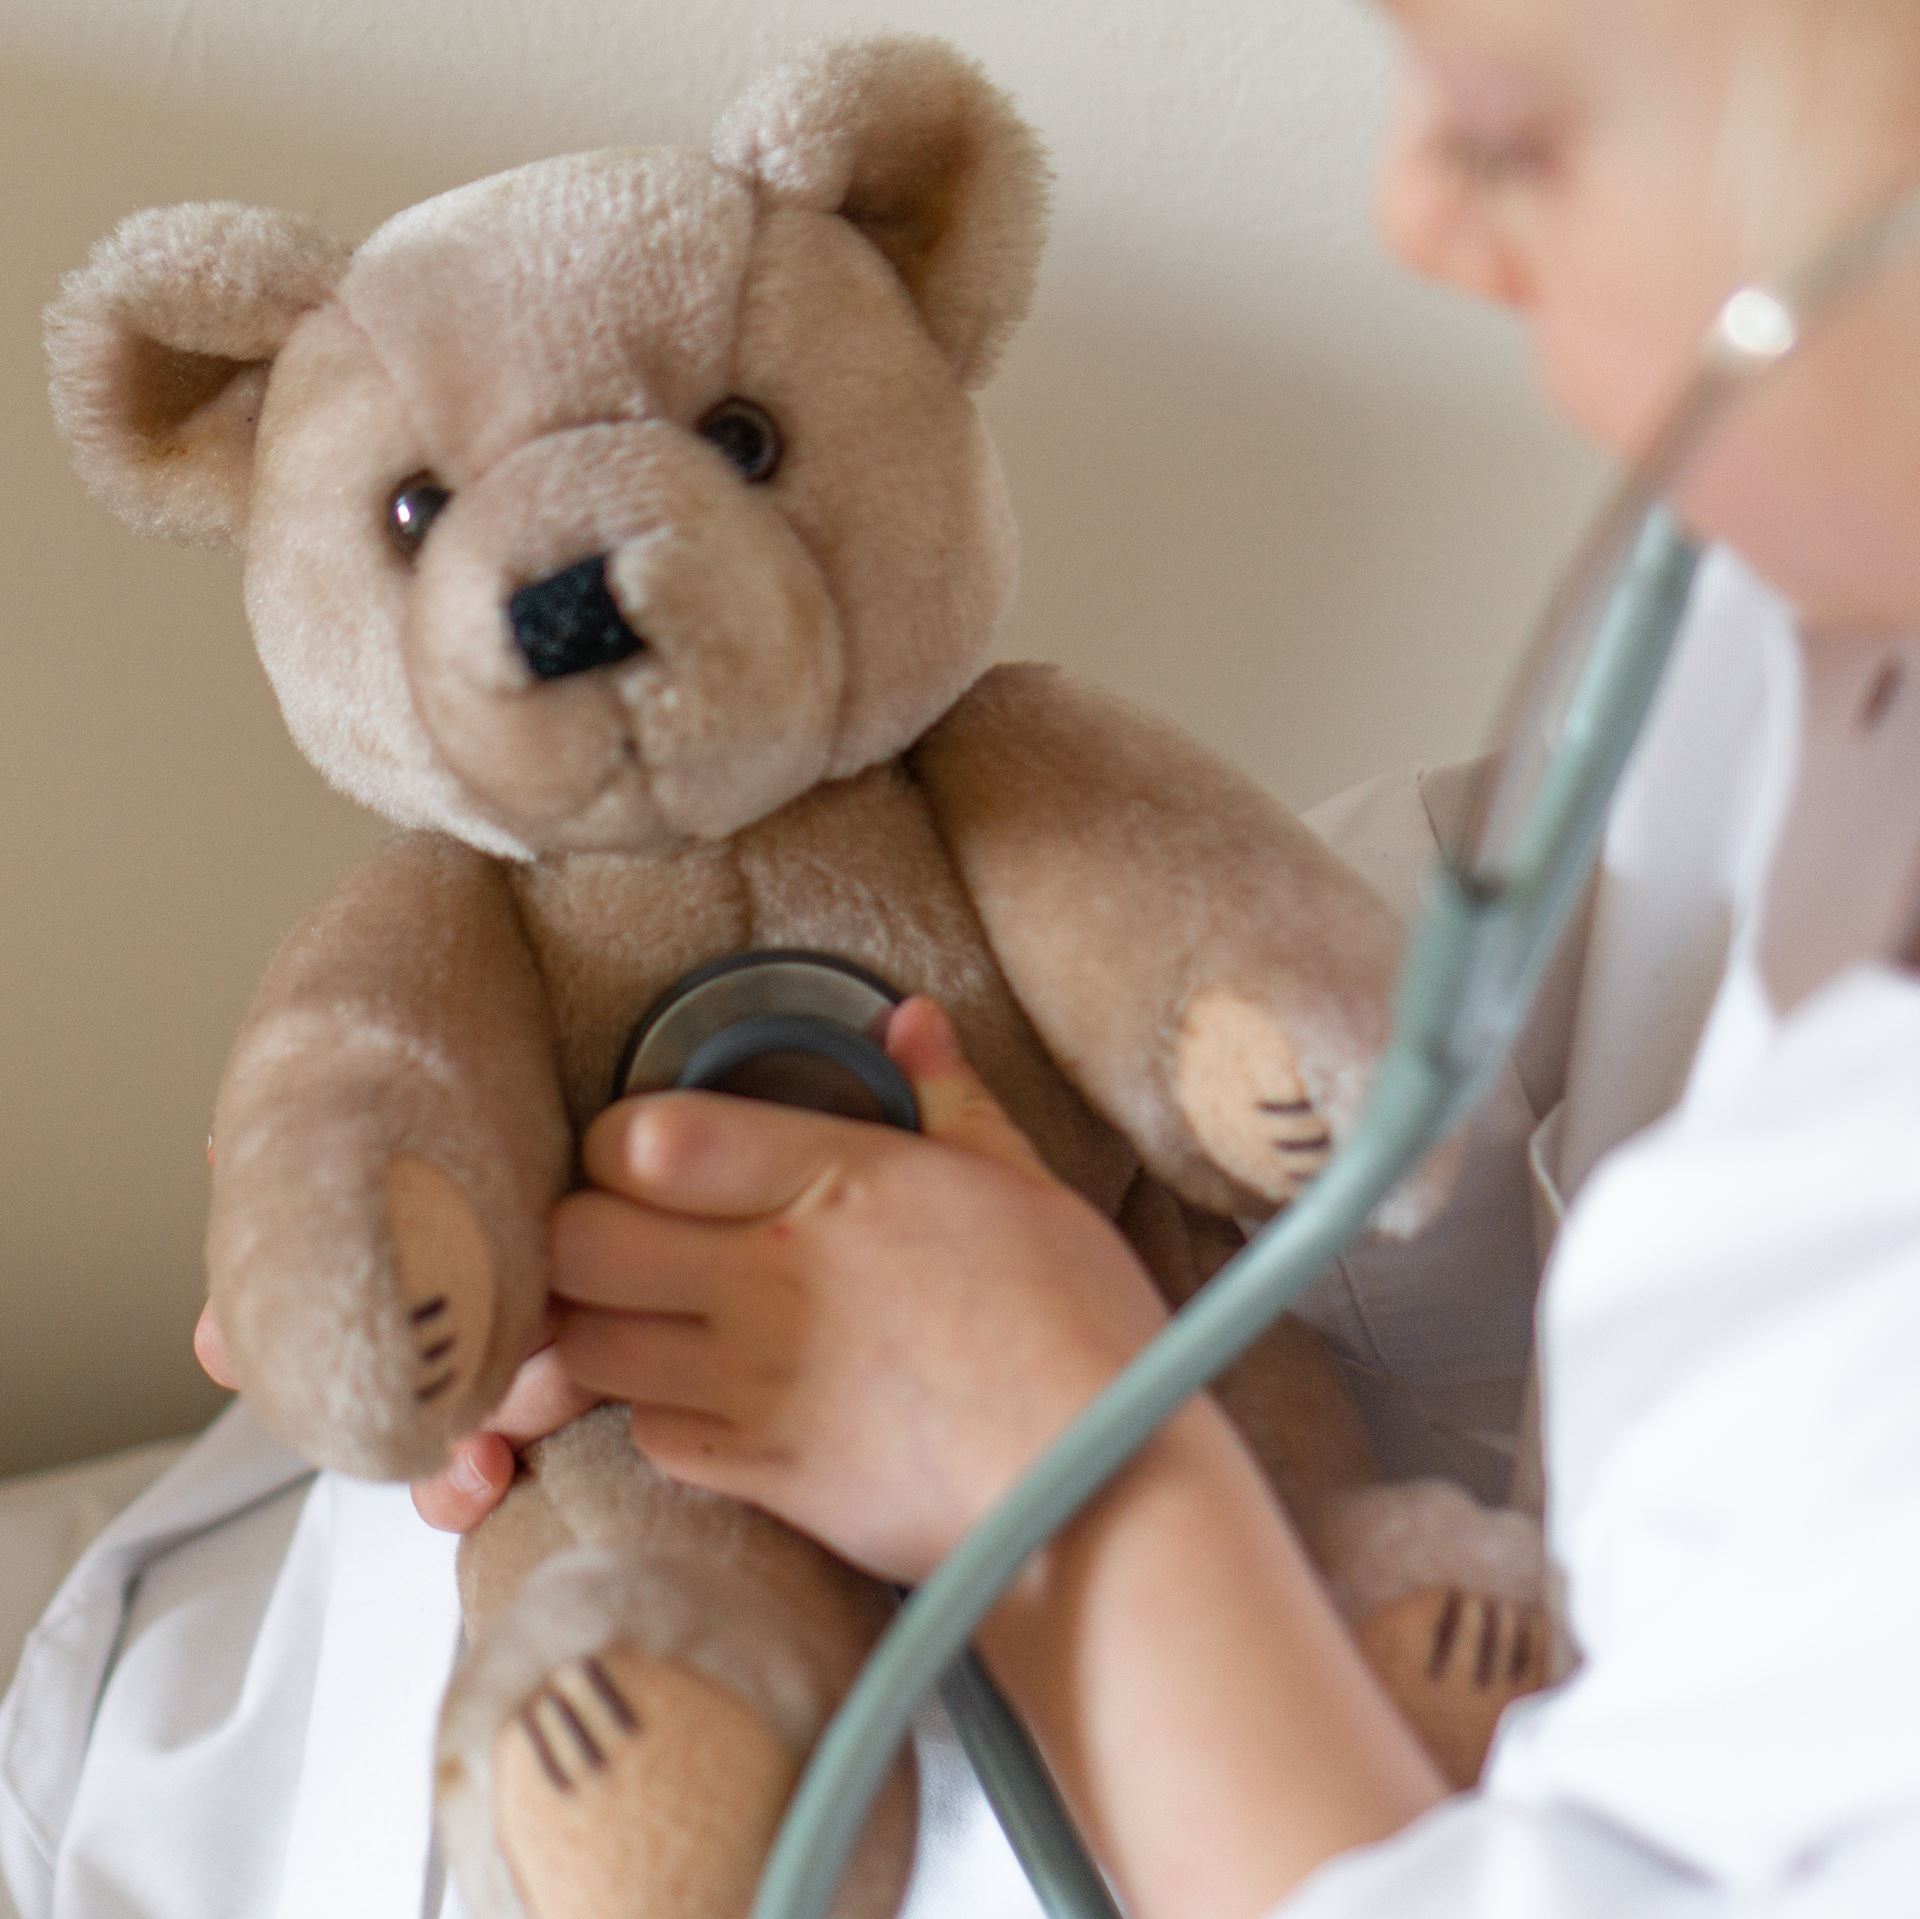 a child with a teddy bear using a stethoscope